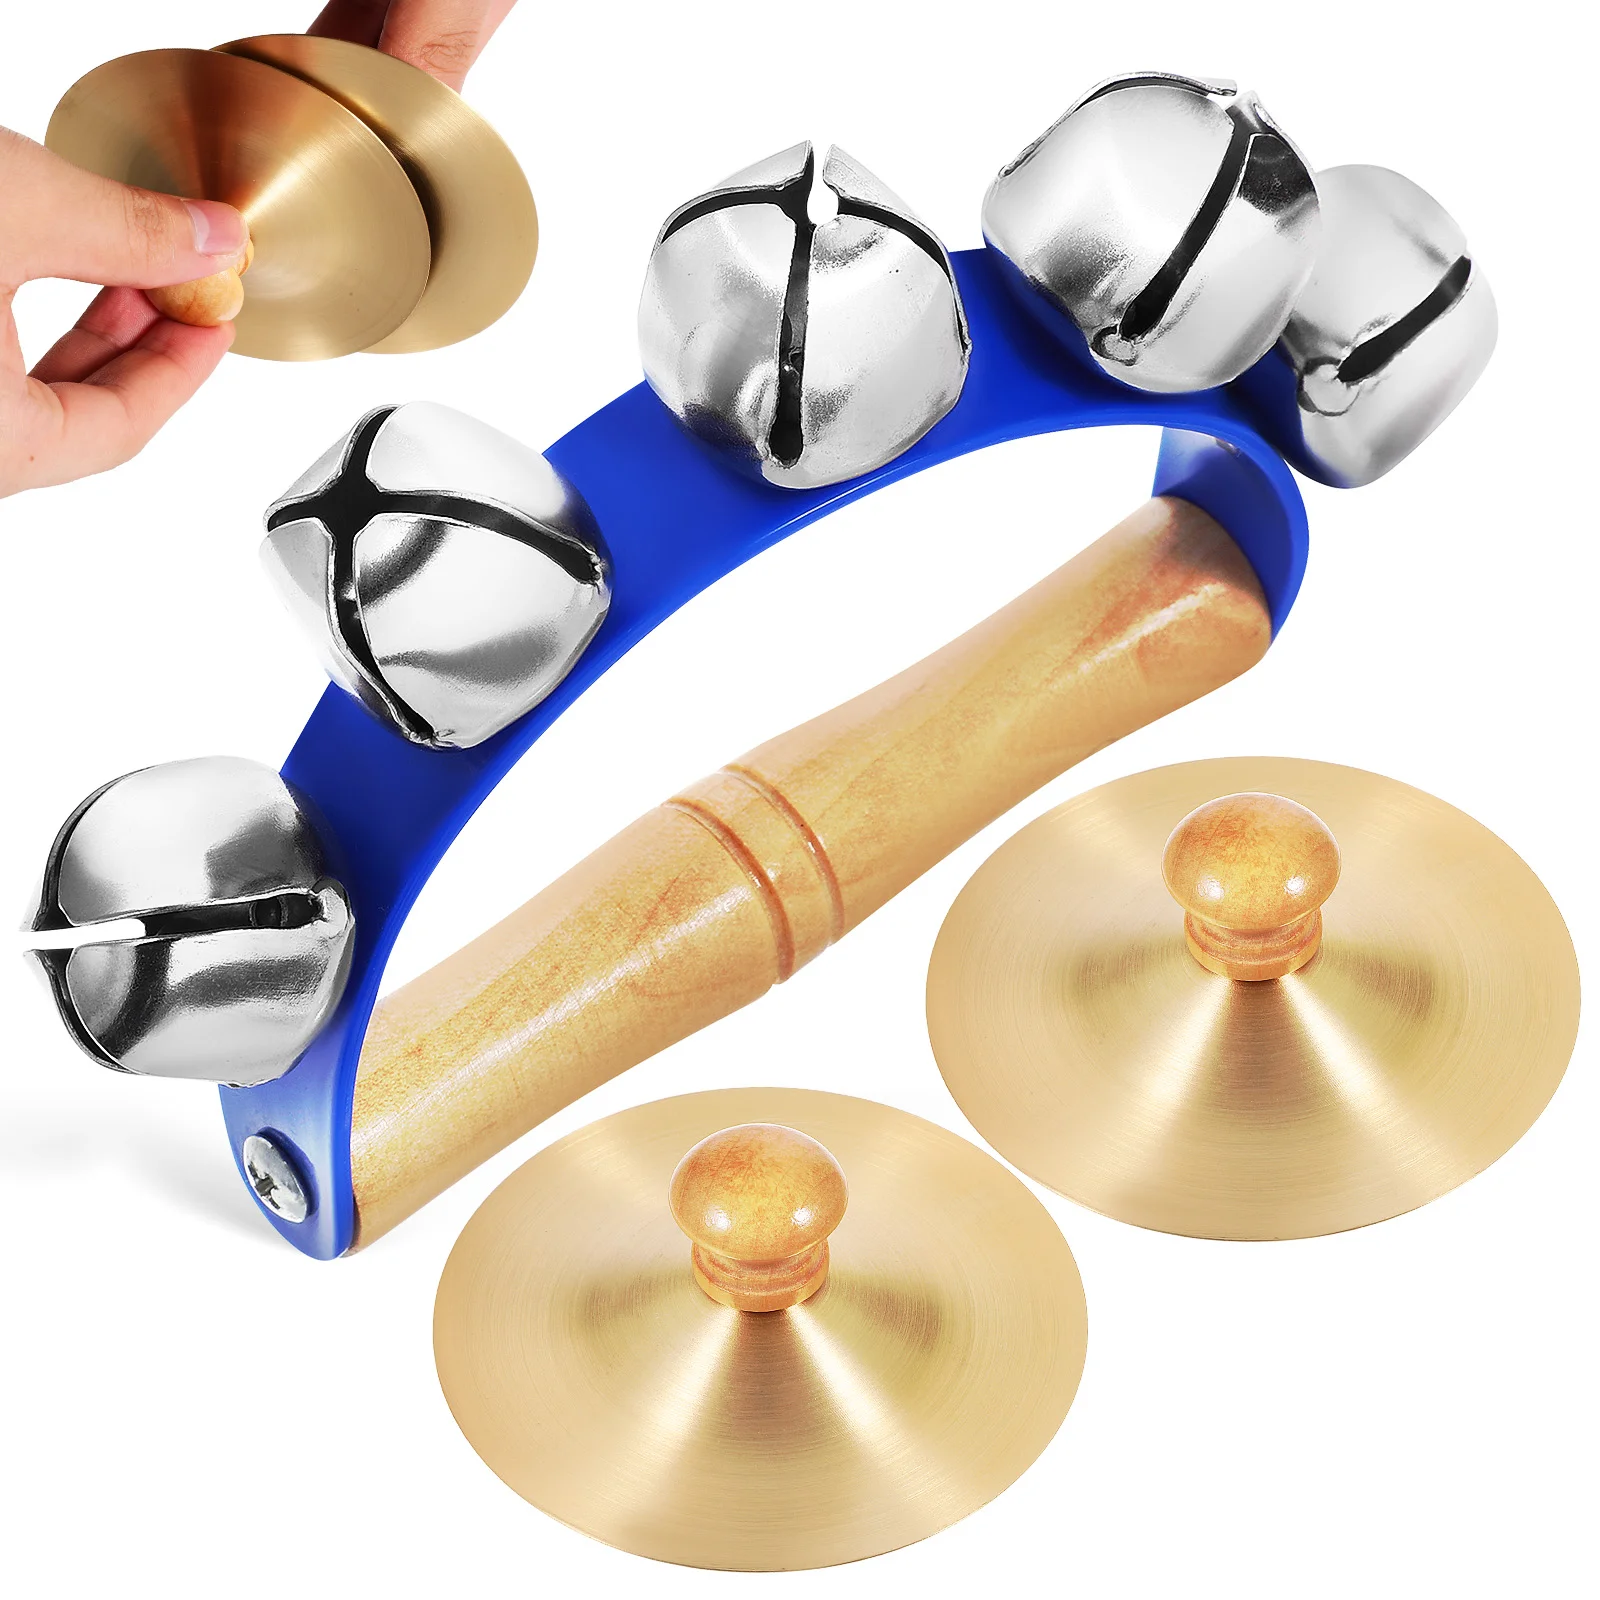 

Wooden Handle Handheld Jingle Bell with Copper Hand Cymbals Early Educational Musical Instrument for Kids